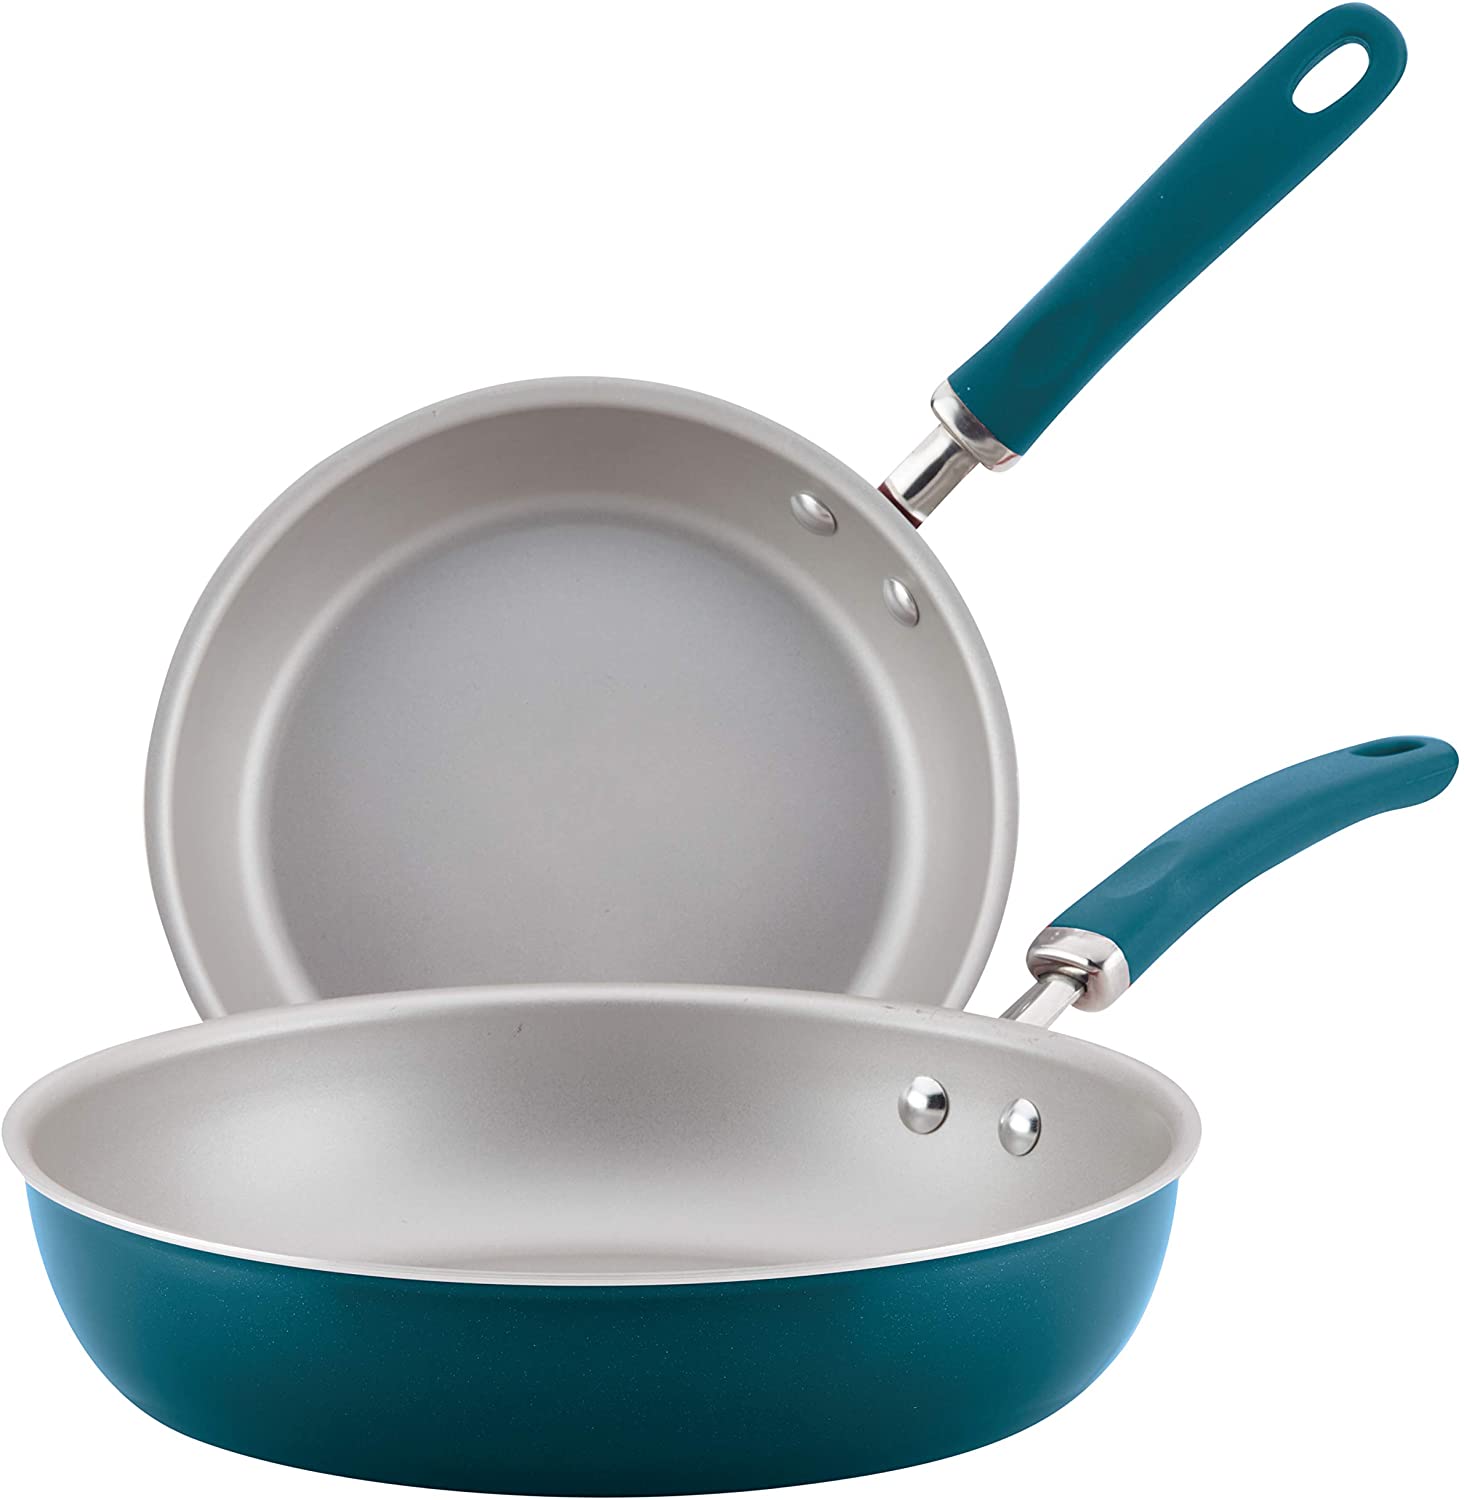 Rachael Ray Create Delicious 2 Piece Nonstick Skillet Set, Teal Shimmer